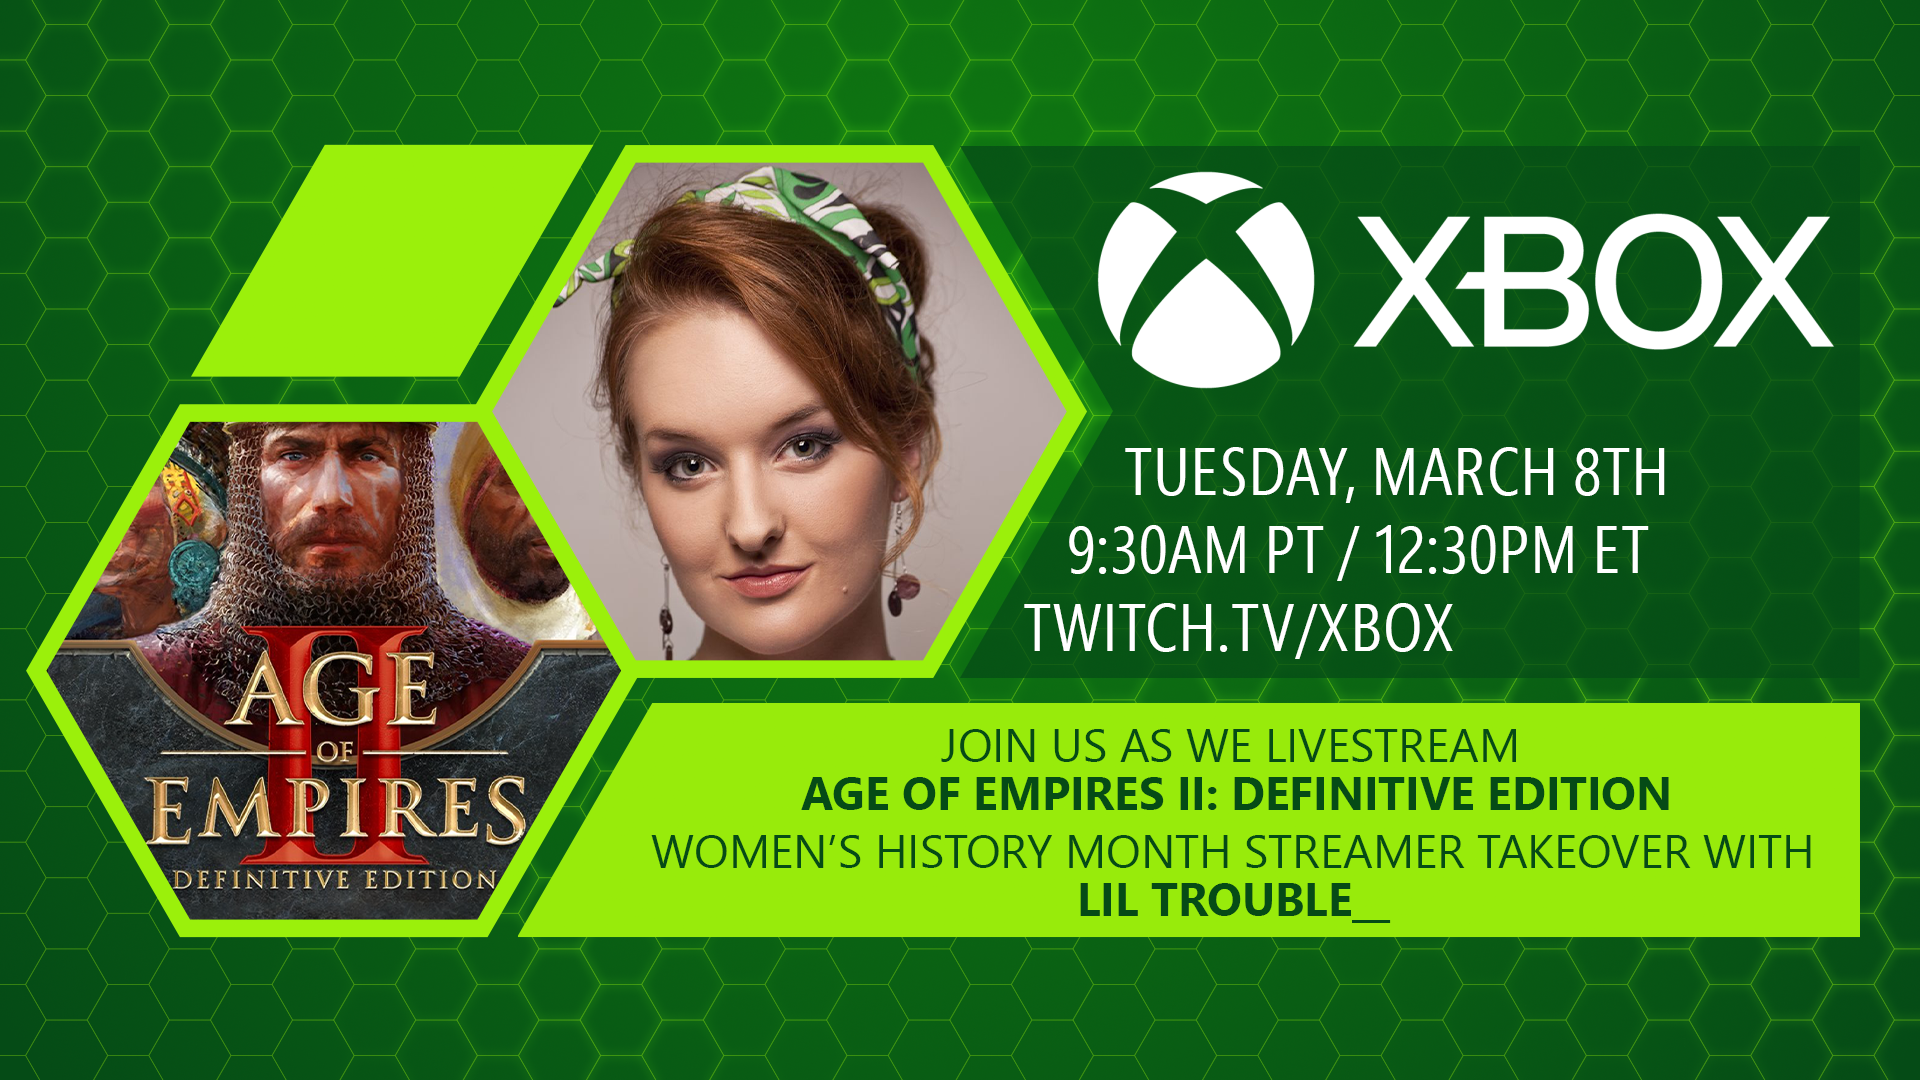 Green hexagons and boxes on a green background. LilTrouble__ profile headshot. Age of Empires II: Definitive Edition logo. Text reads: XBOX - Tuesday, March 8th - 9:30AM PT / 12:30PM ET - twitch.tv/xbox - Join us as we livestream Age of Empires II: Definitive Edition Women's History Month streamer takeover with LilTrouble__